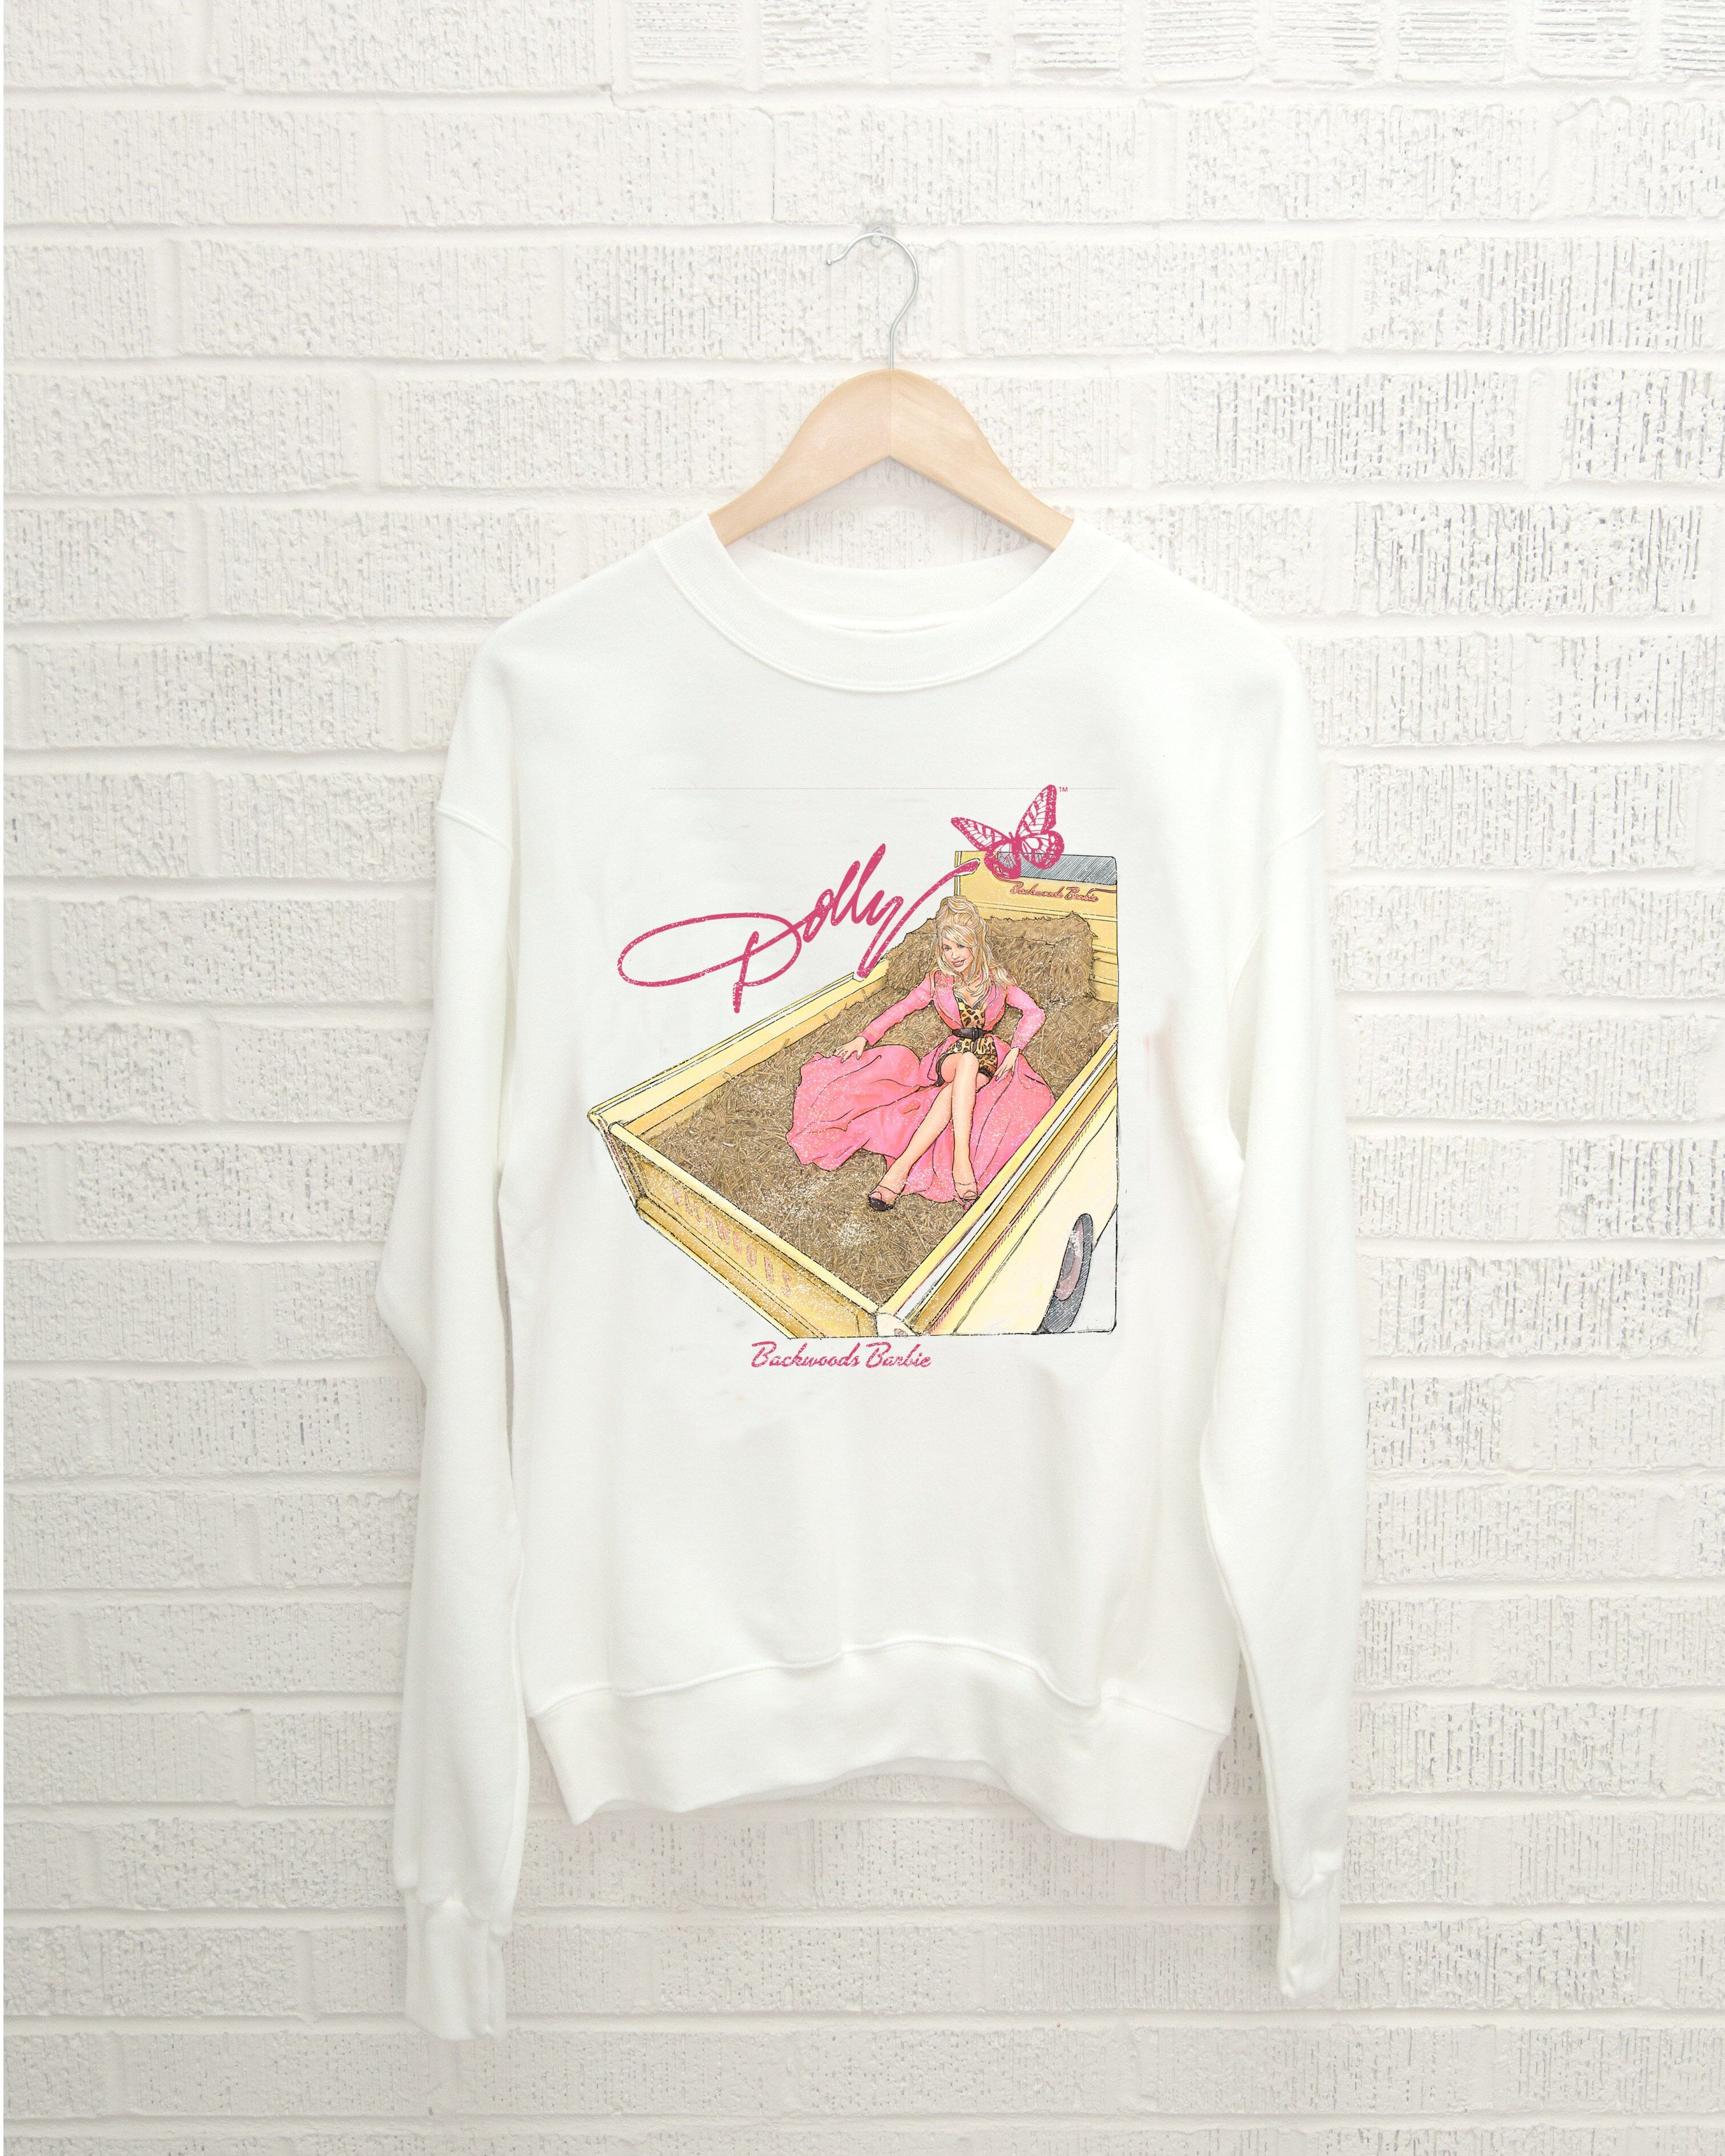 Dolly Parton Backwoods Barbie White Thrifted Sweatshirt